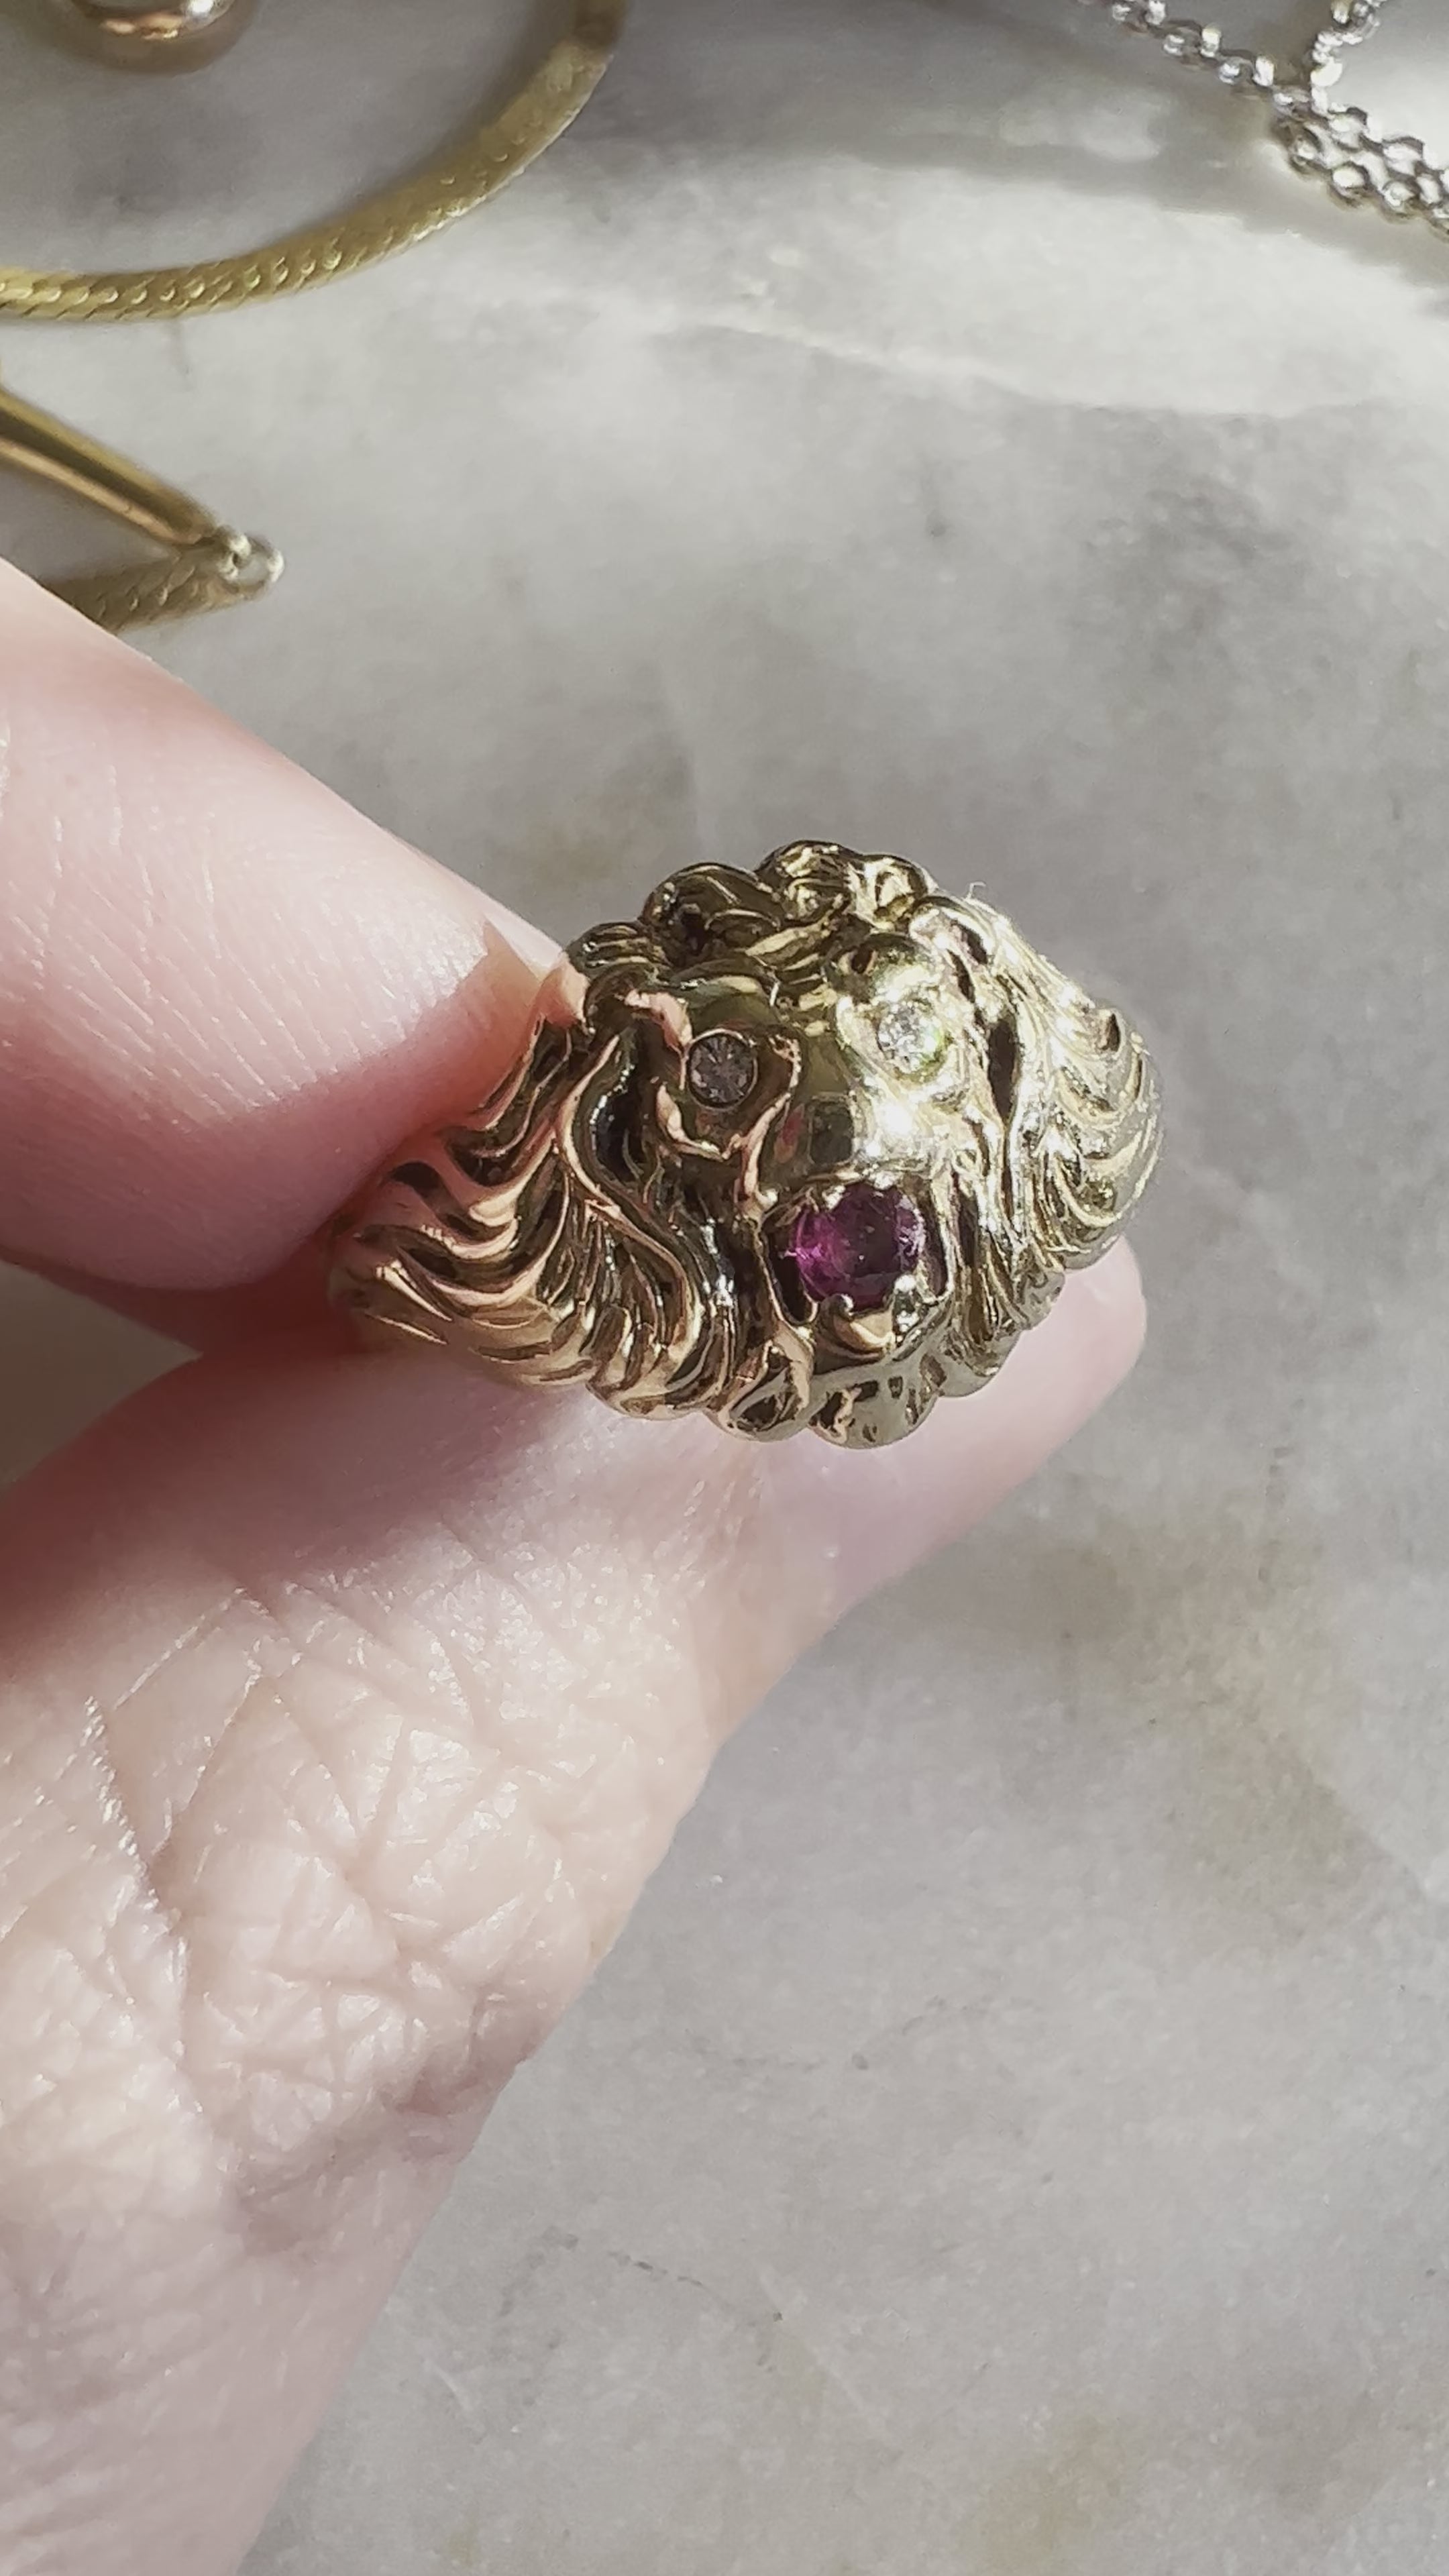 9 beautiful antique gold ring designs for female. cocktail rings are  evergreen fashion an… | Antique gold rings, Gold rings jewelry, Gold  jewellery design necklaces